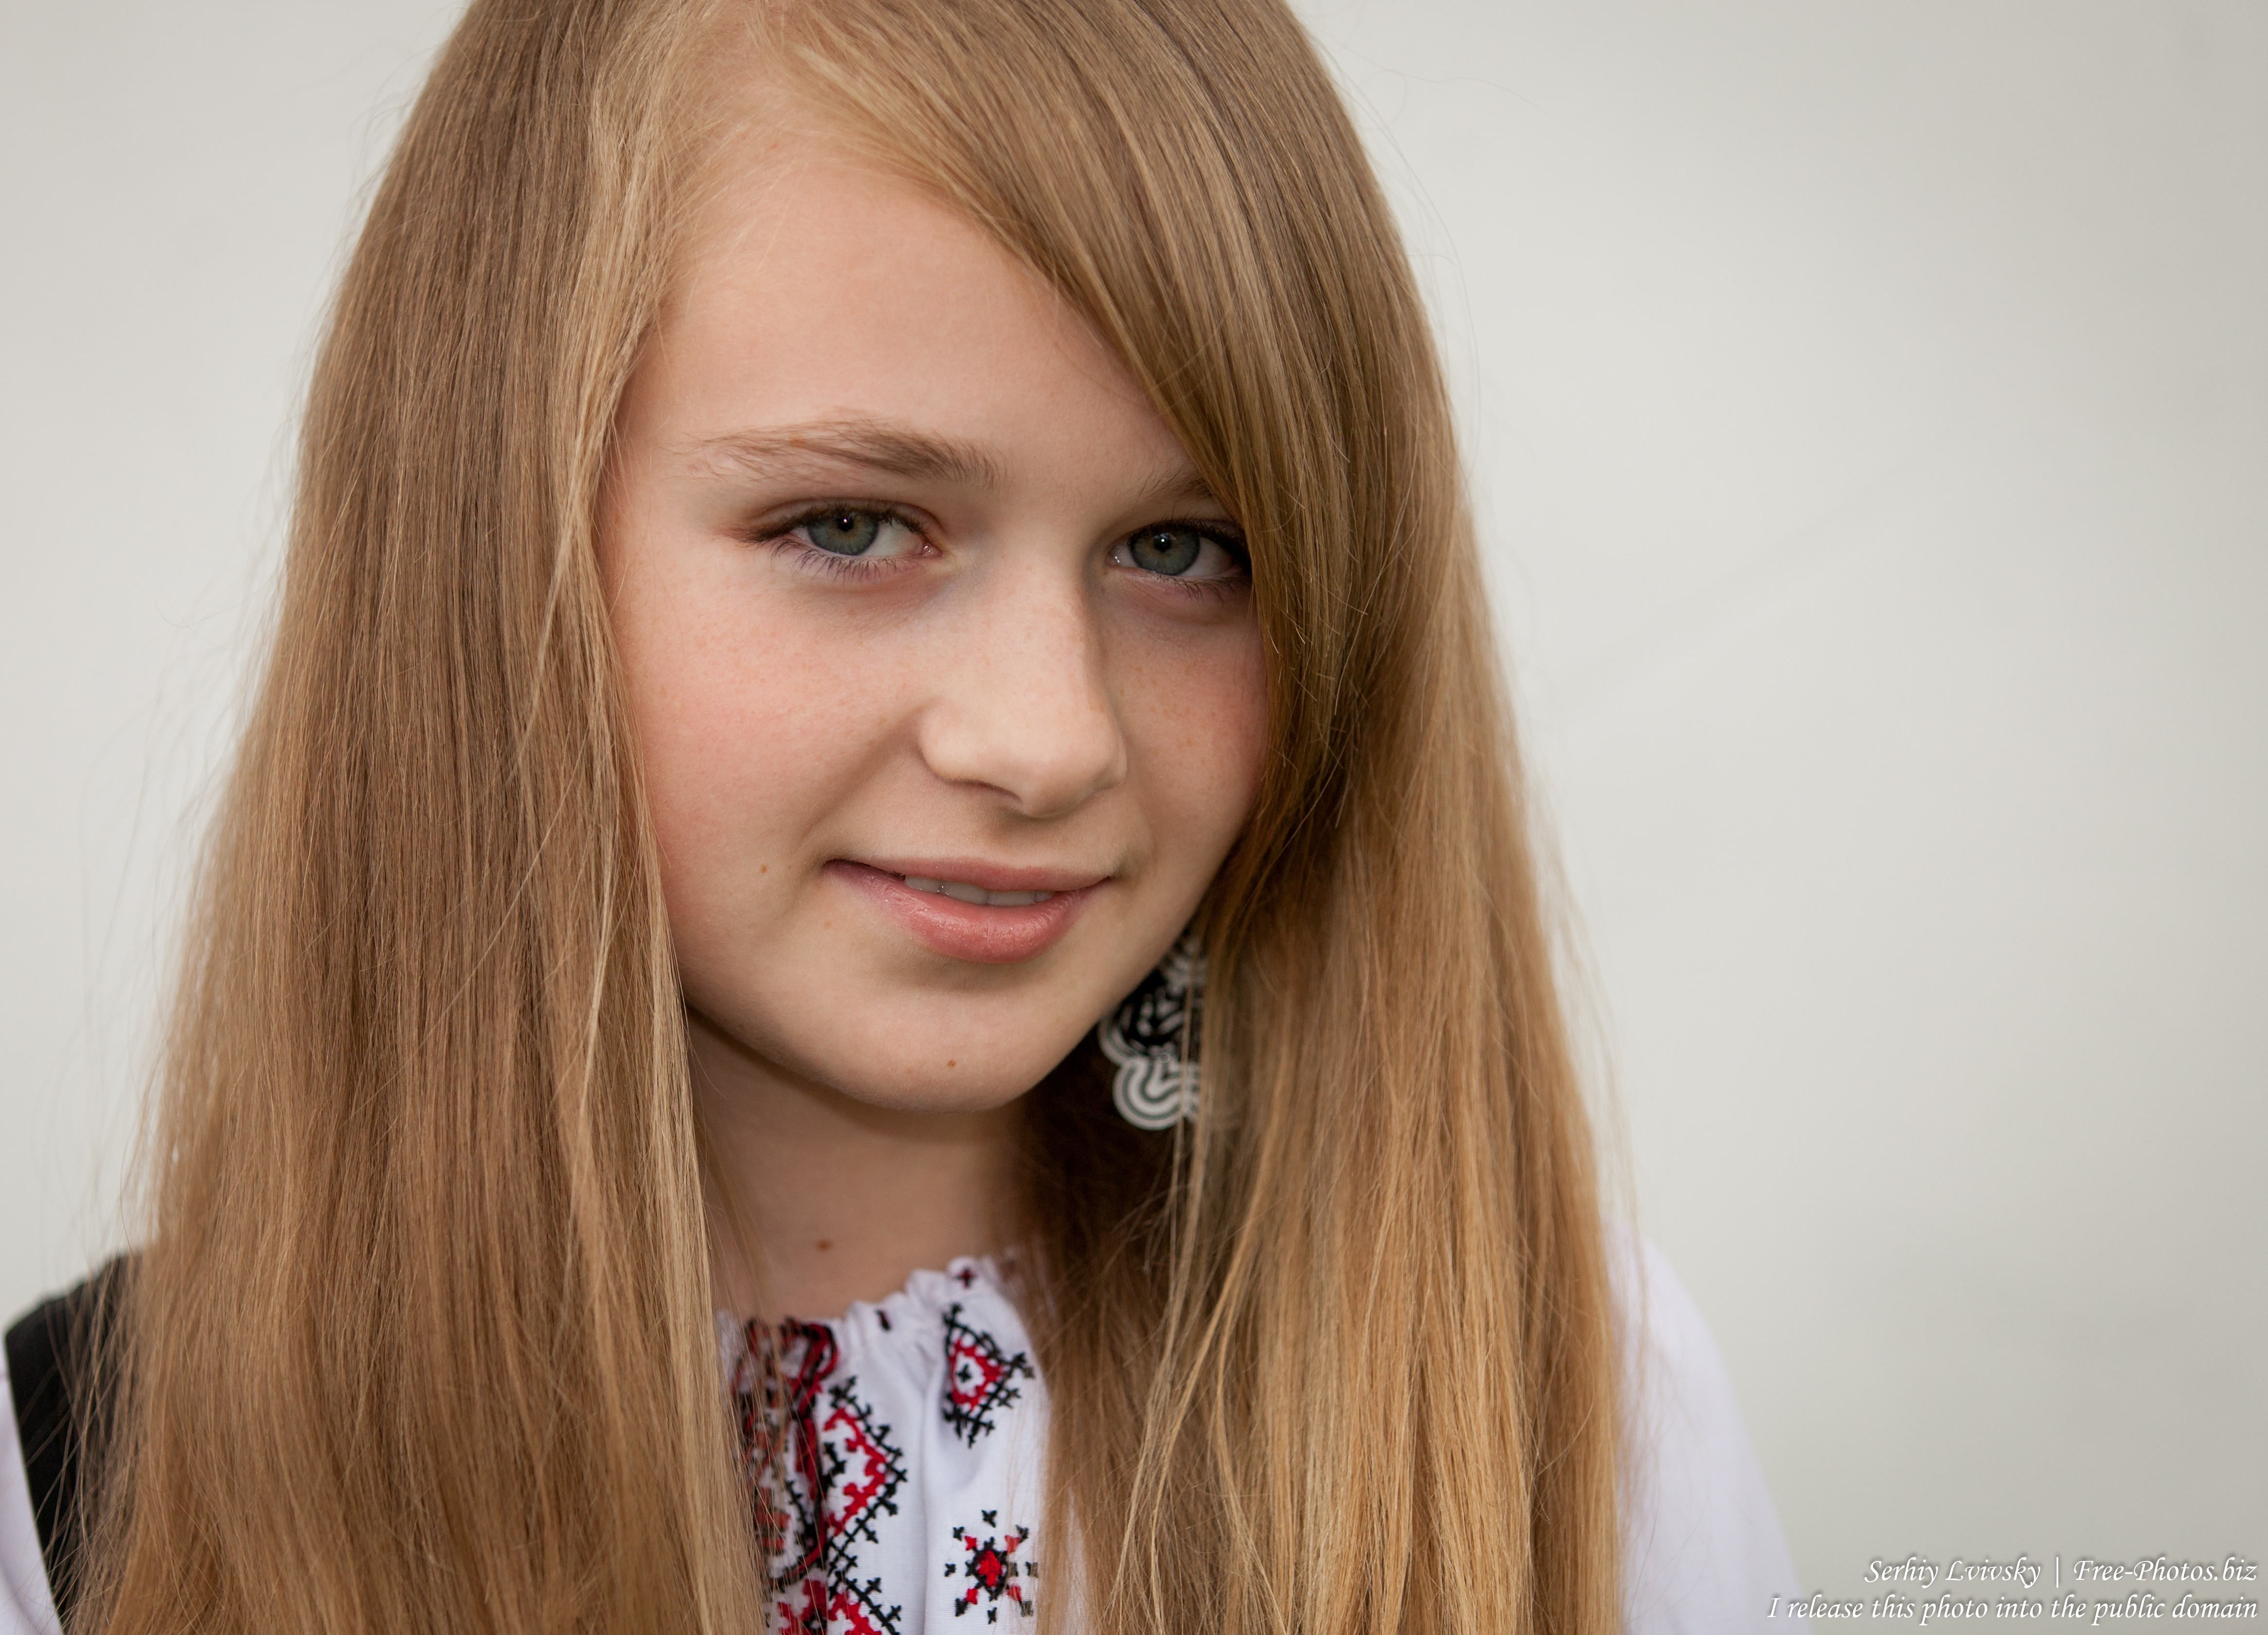 a blond 13-year-old girl photographed in June 2015, picture 19